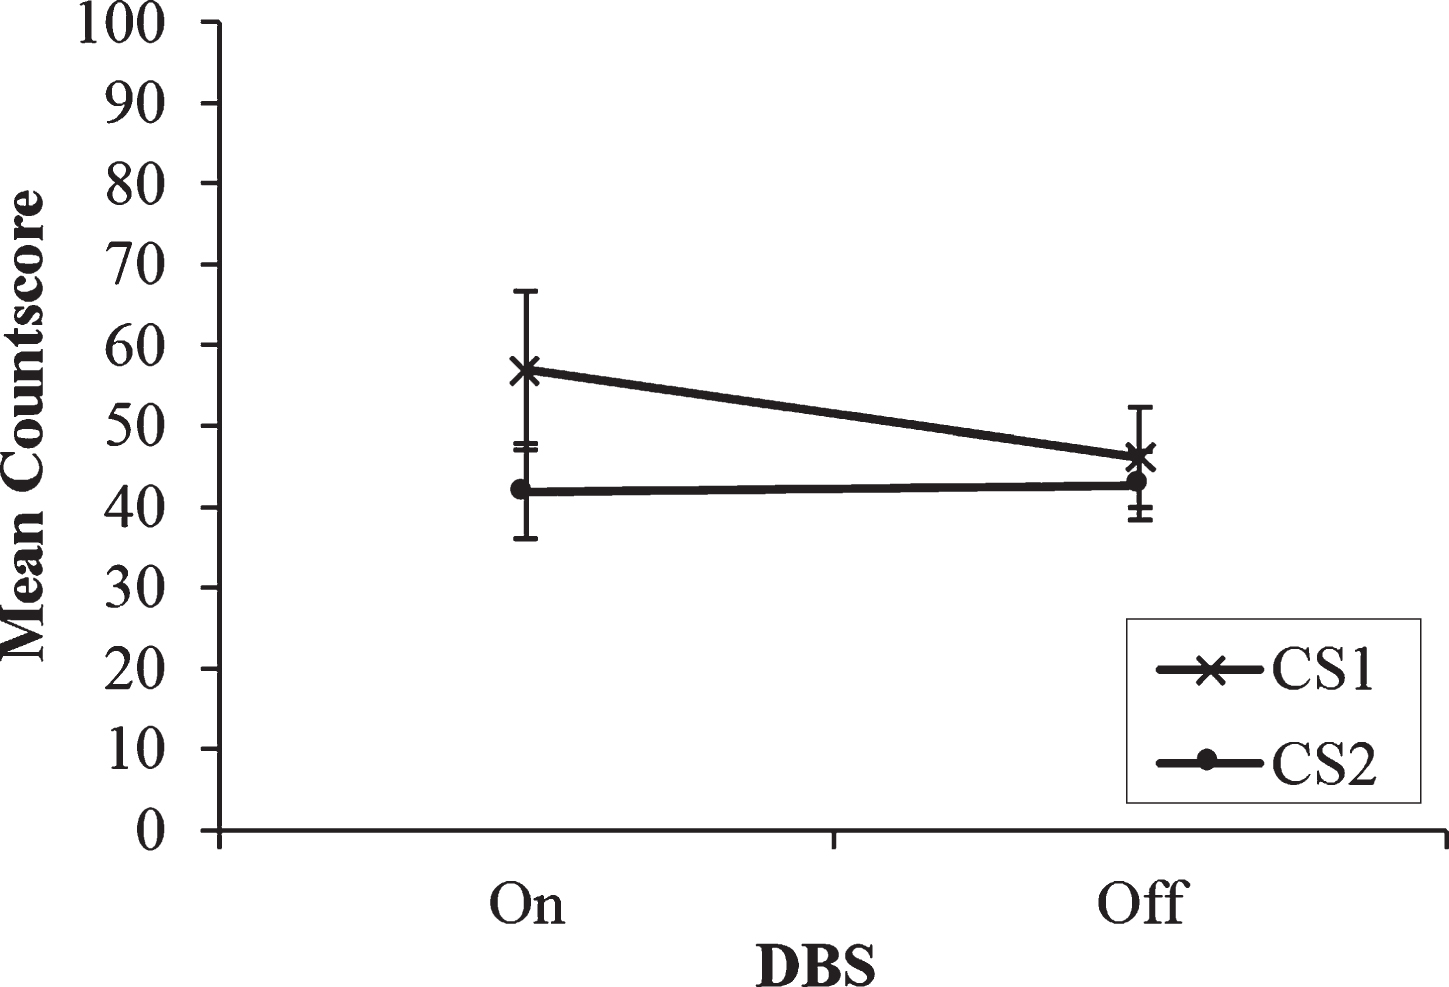 Mean countscore 1 (CS1) and countscore 2 (CS2) at the middle rate (0.5 Hz) of paced random number generation, with deep brain stimulation (DBS) of the subthalamic nucleus on versus off. Error bars are standard error.